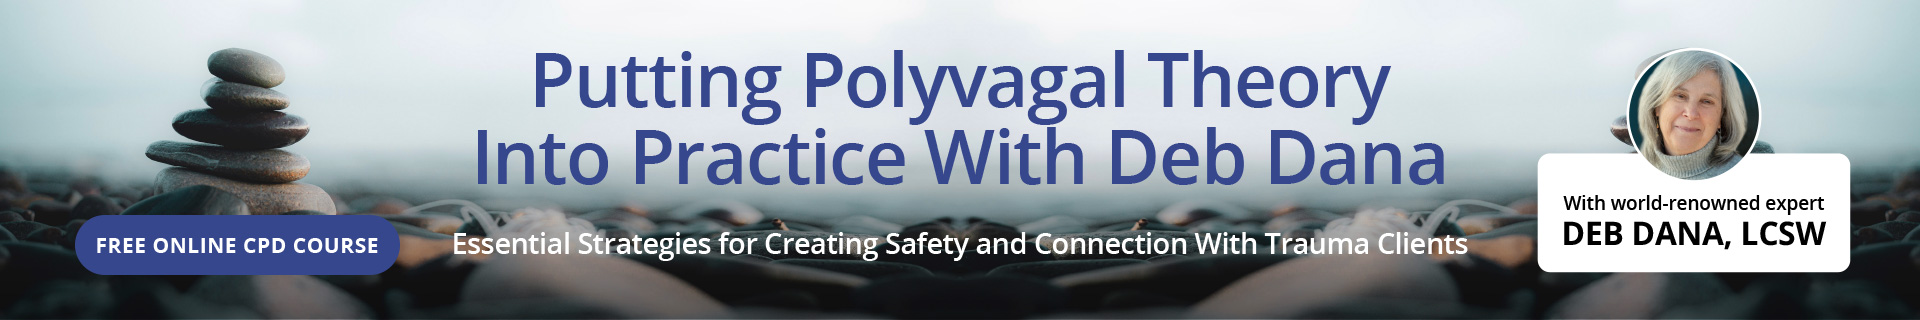 Putting Polyvagal Theory Into Practice With Deb Dana: Essential Strategies for Creating Safety and Connection With Trauma Clients